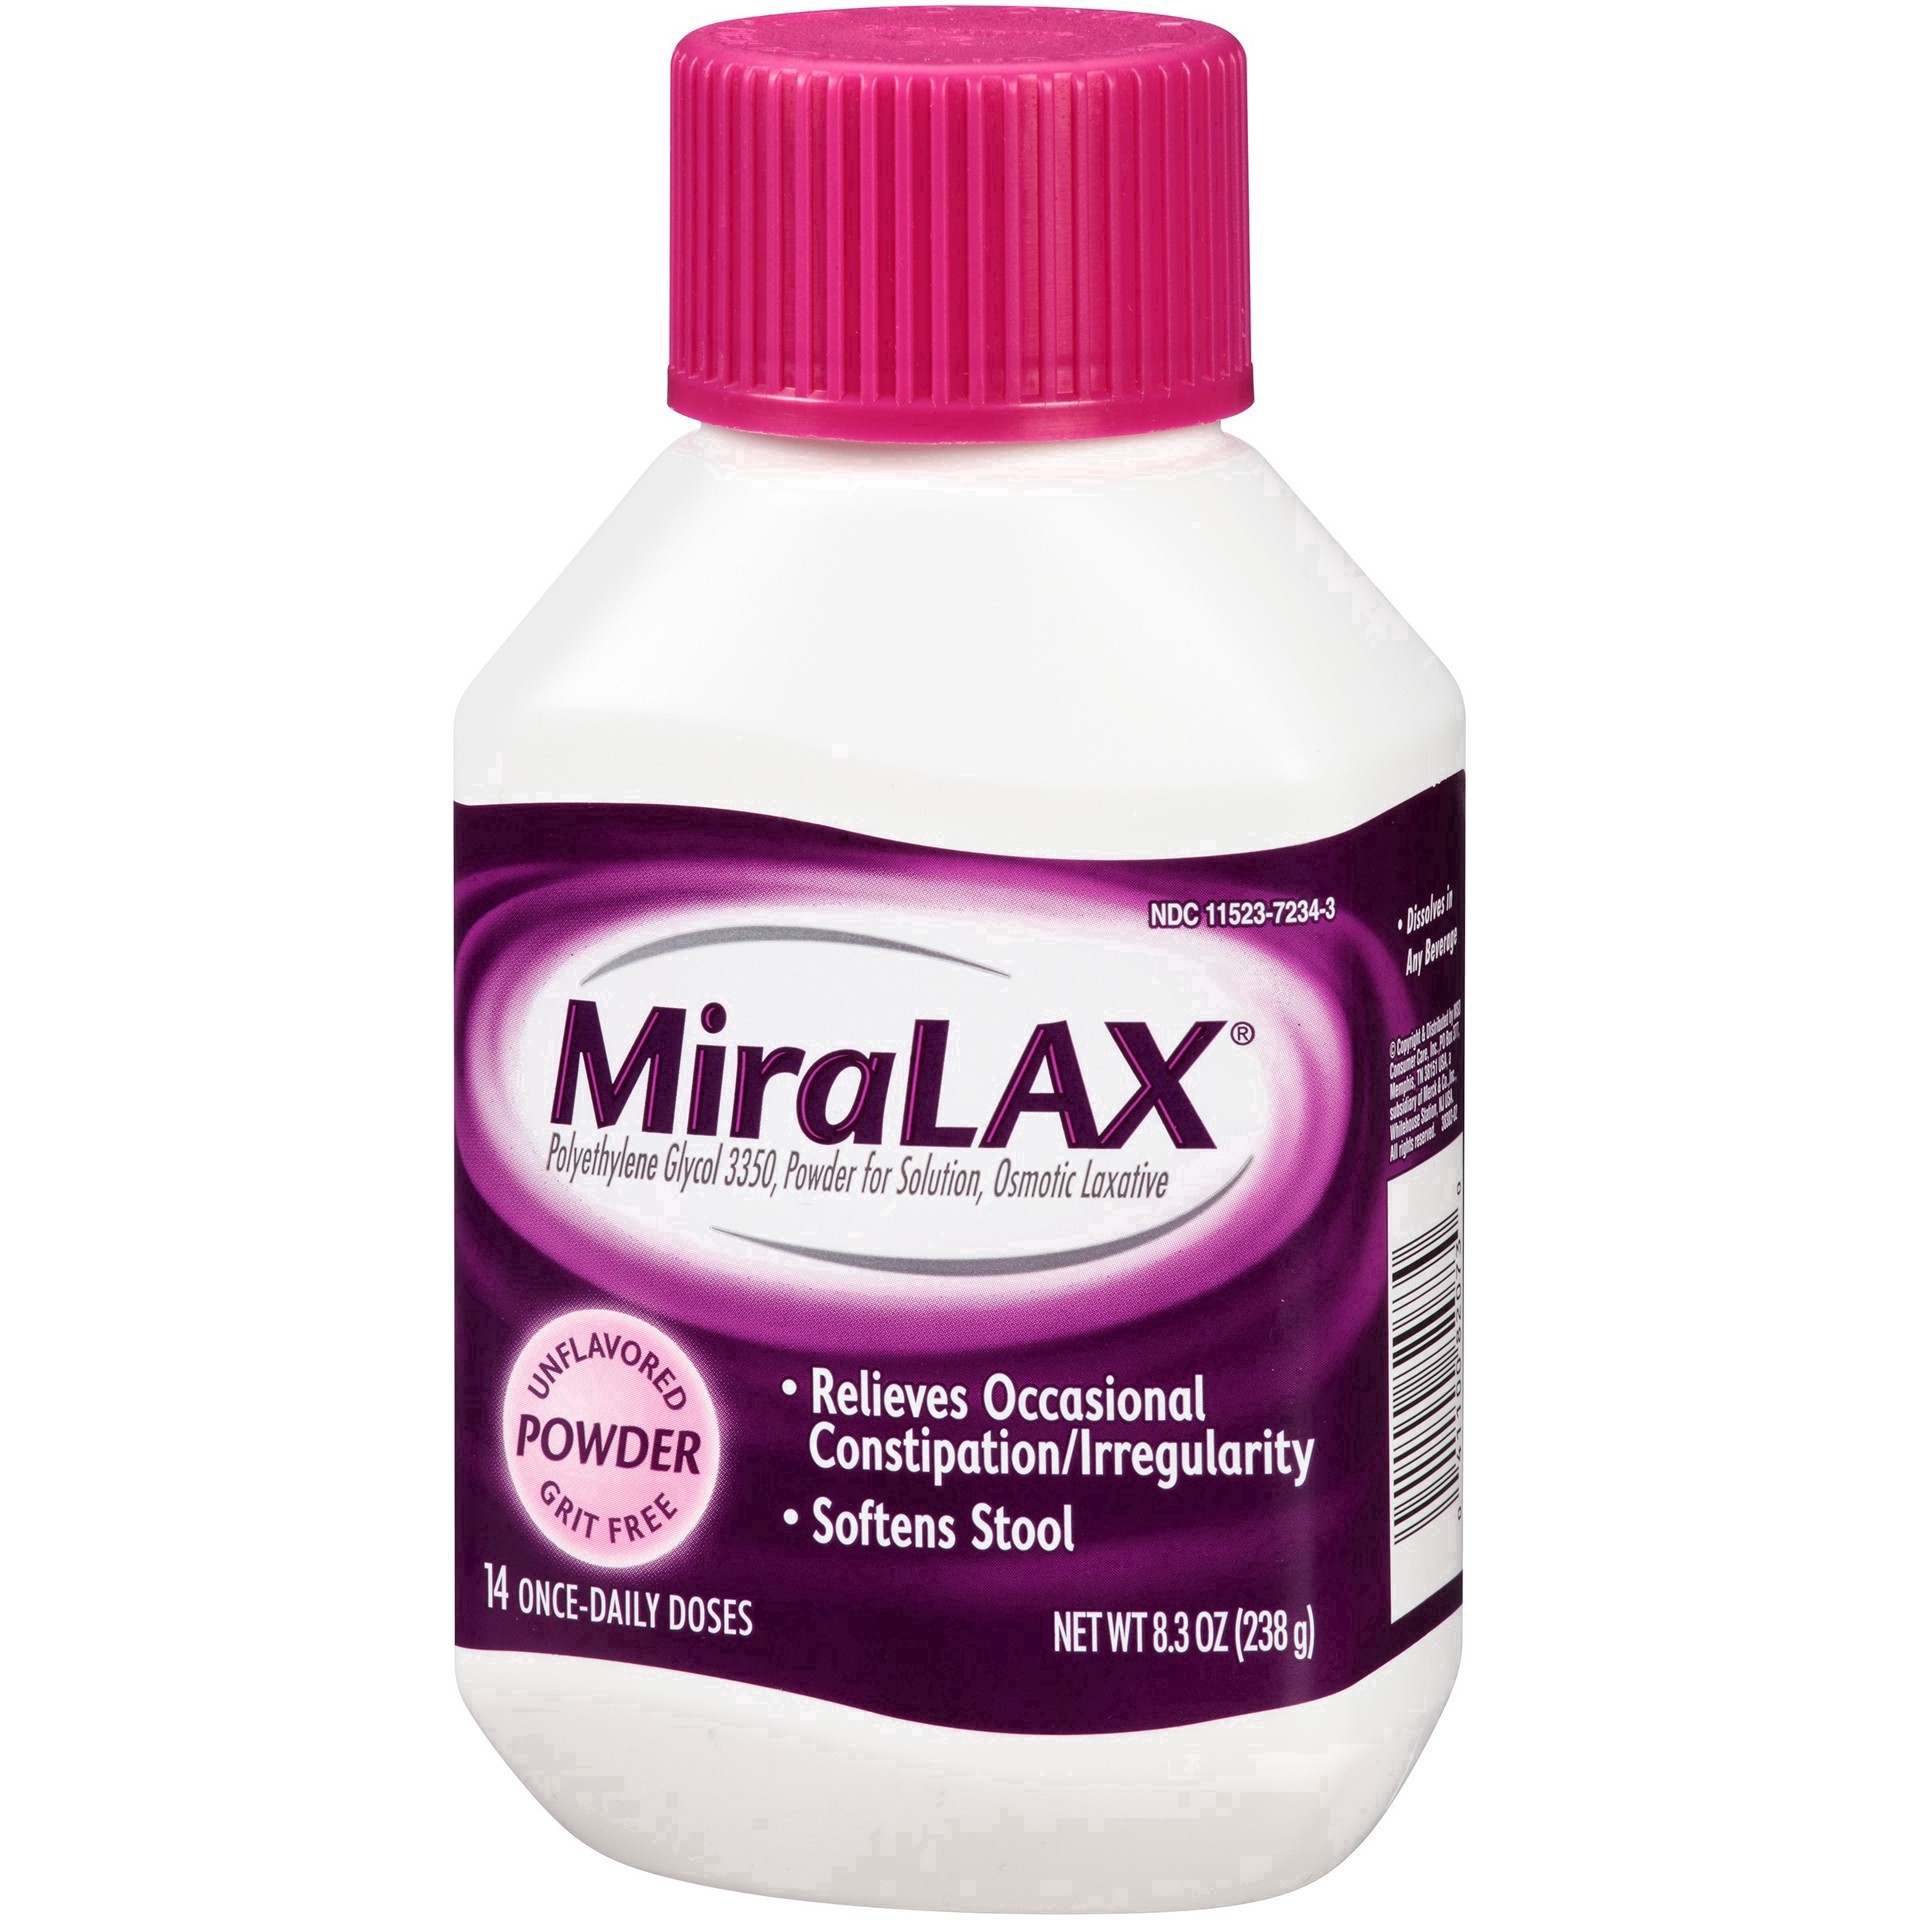 slide 12 of 37, Miralax Powder Osmotic Unflavored Laxative 8.3 oz Bottle, 